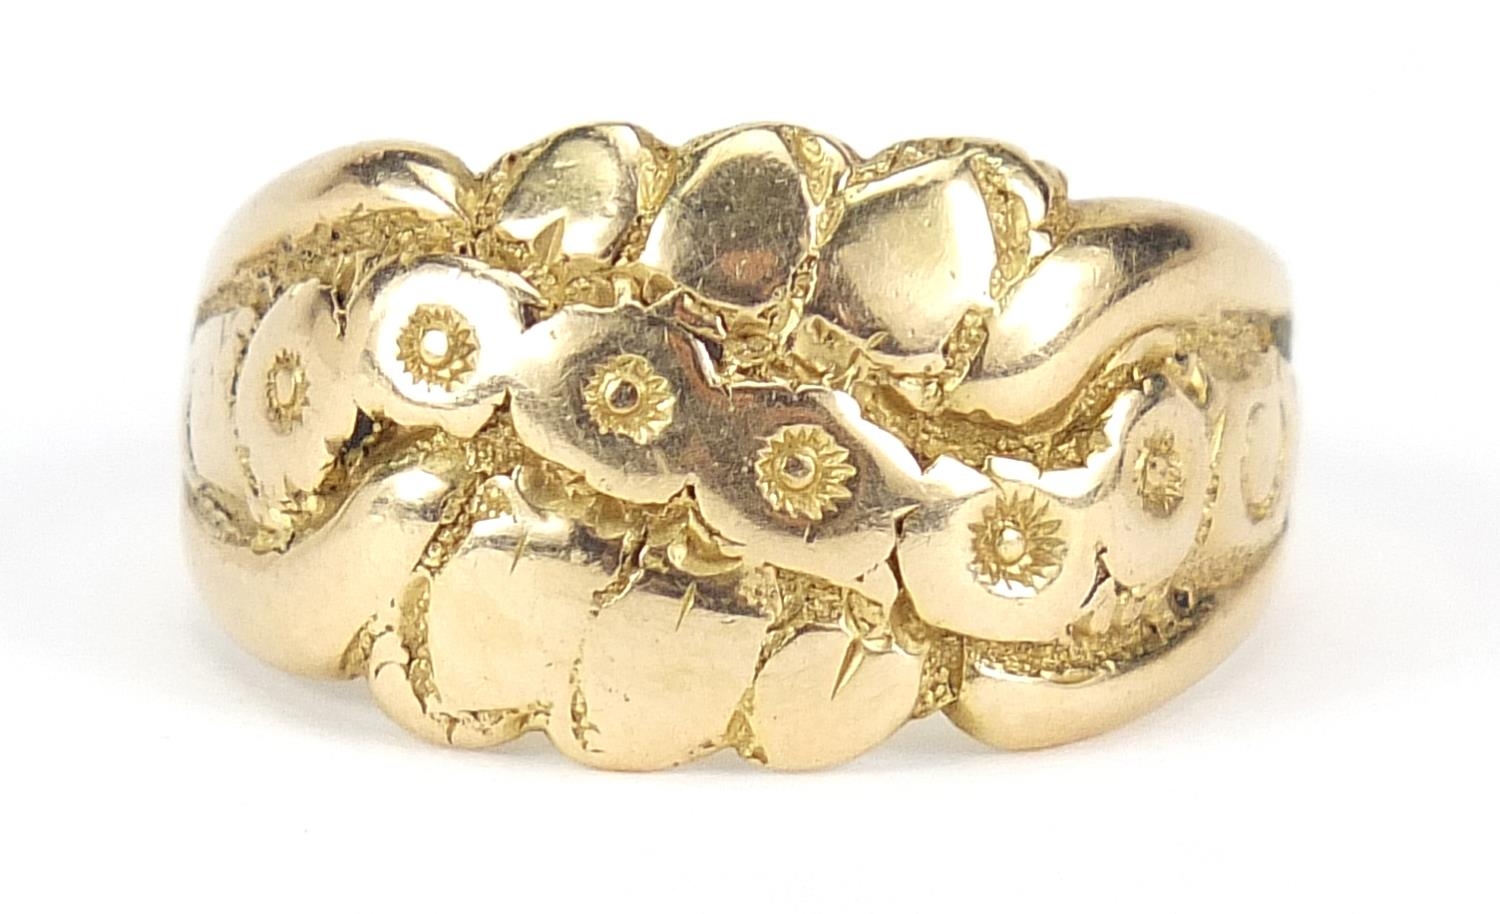 18ct gold ring with embossed decoration, indistinct marks, size S, 7.8g - this lot is sold without